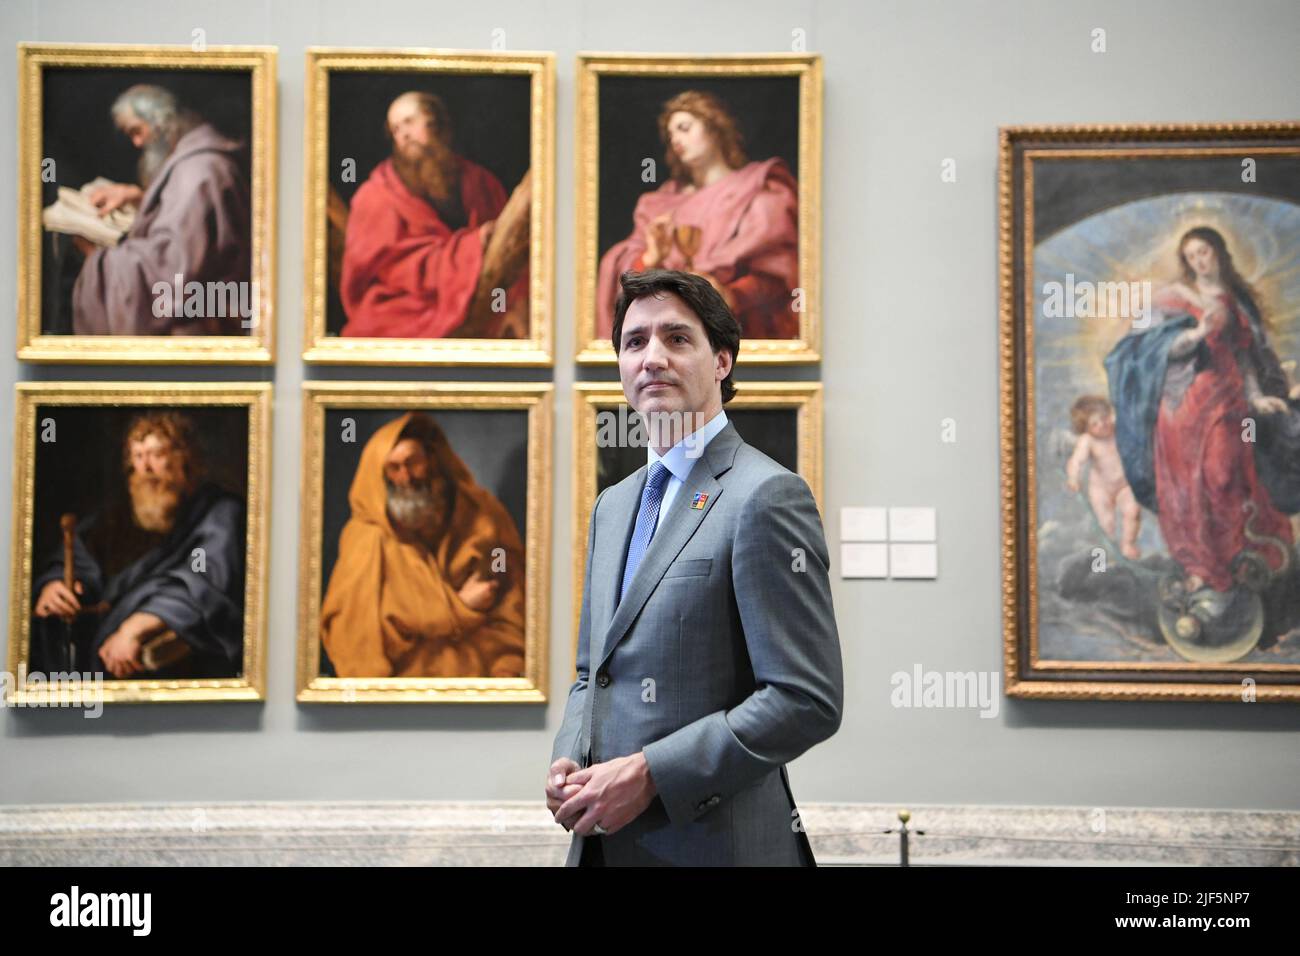 Madrid, Spain, June 29, 2022, Canadian Prime Minister Justin Trudeau visits the Prado Museum in Madrid, Spain on June 29, 2022, as they attend an official dinner during a NATO summit. Photo by Bertrand Guay/Pool/ABACAPRESS.COM Stock Photo